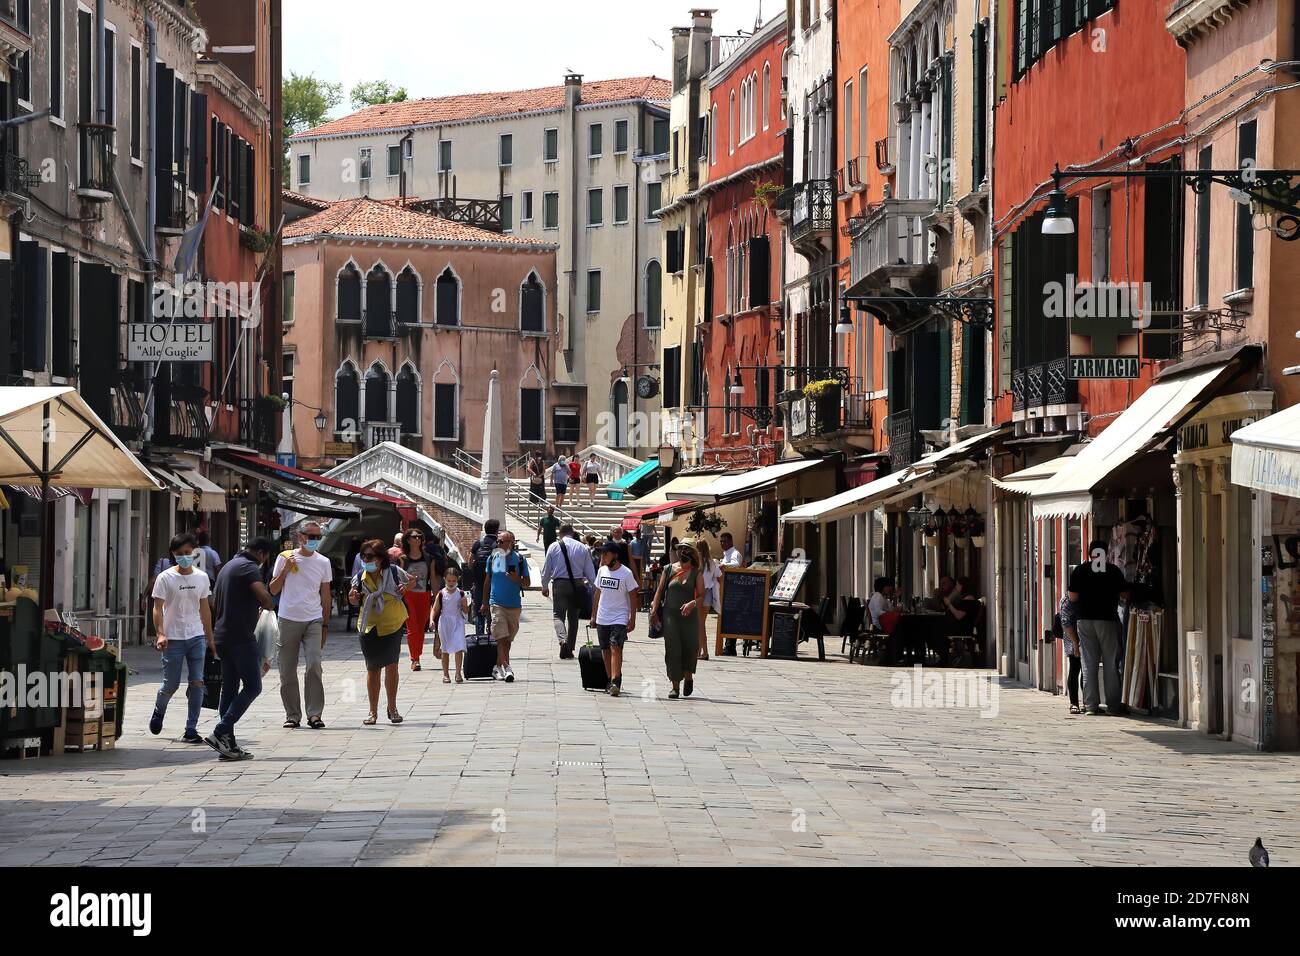 Venice, Italy. June 24, 2020. First tourists walking on a street of Venice historic centre city after the Italian lockdown for the covid-19 pandemic c Stock Photo